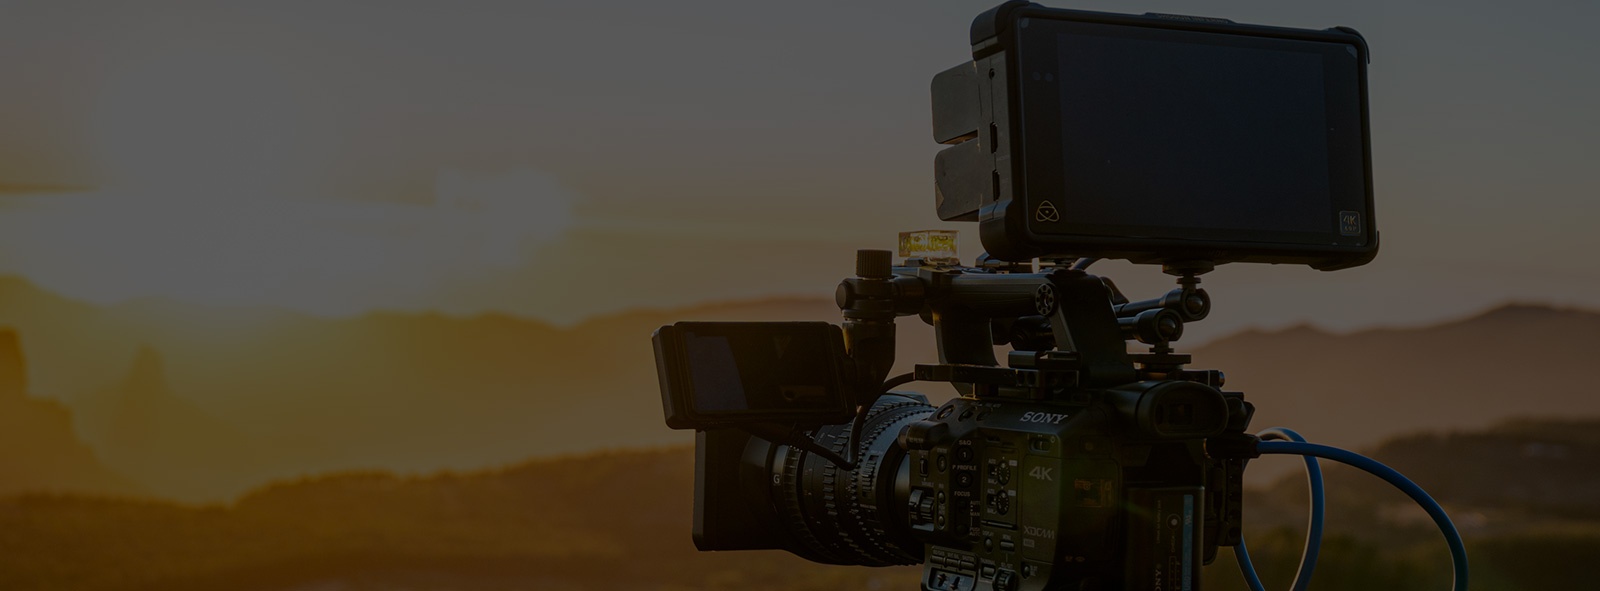 Business Video Production Services: Promotional Videos For Businesses